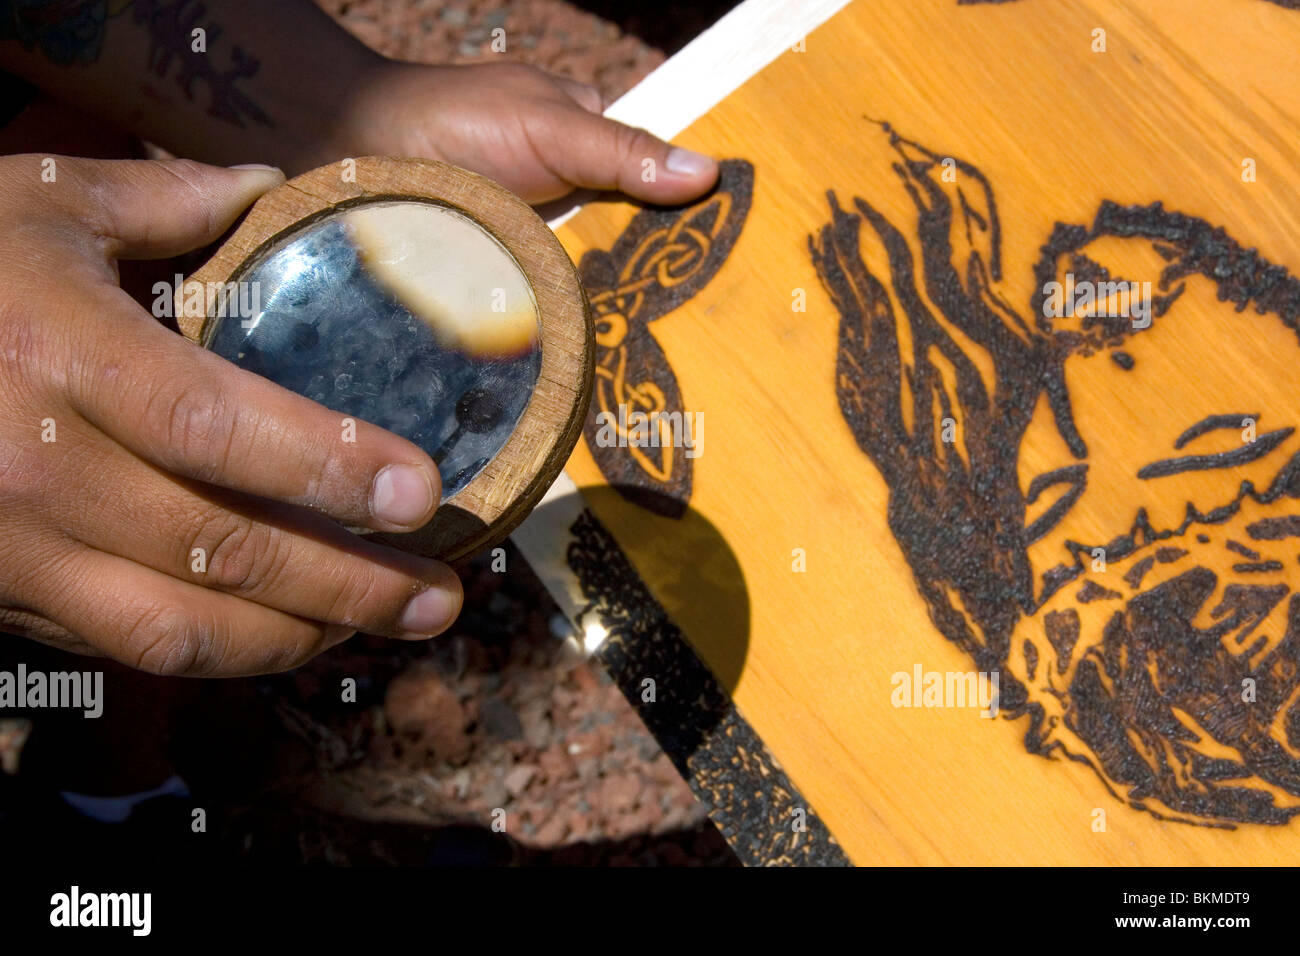 Sunlight being concentrated with a magnifying lens to burn a design into wood creating art. Cholula, Puebla, Mexico. Stock Photo